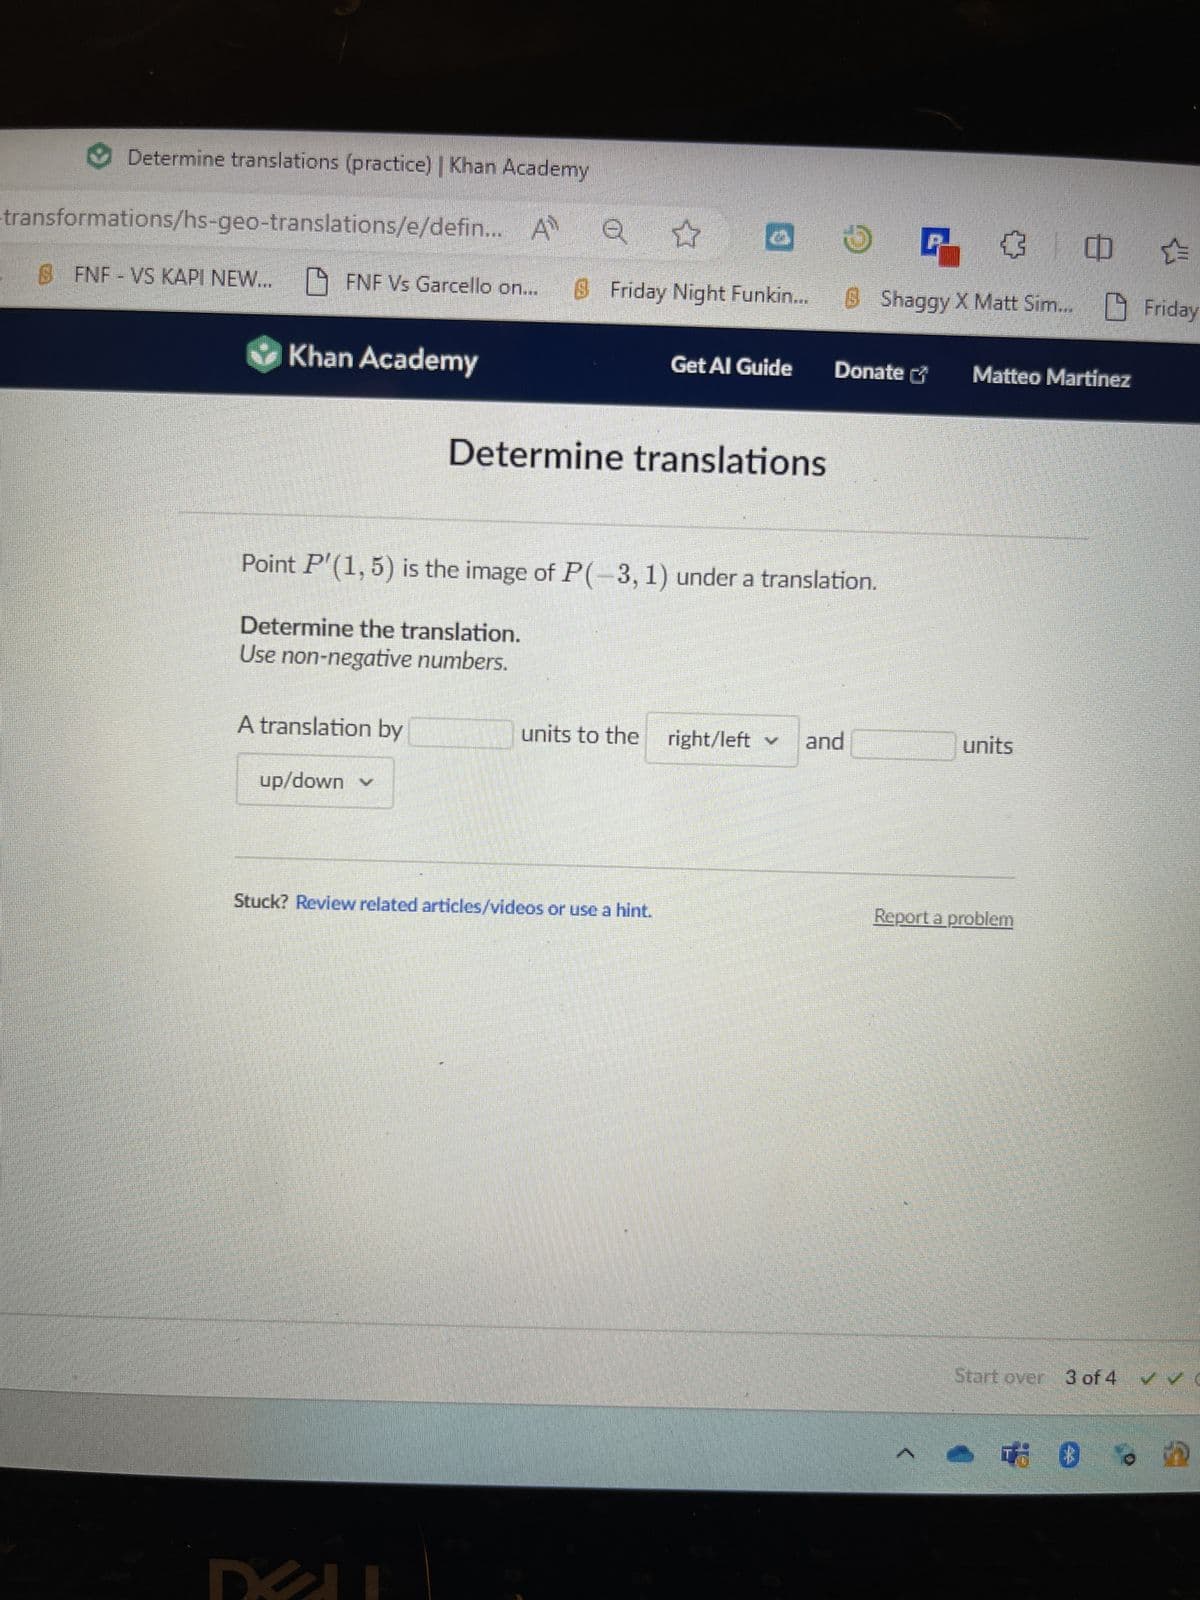 Determine translations (practice) | Khan Academy
transformations/hs-geo-translations/e/defin... A Q ✿
6 FNF - VS KAPI NEW... FNF Vs Garcello on... $ Friday Night Funkin...
✔Khan Academy
A translation by
up/down ✓
Get Al Guide
Determine translations
Point P'(1,5) is the image of P(-3, 1) under a translation.
Determine the translation.
Use non-negative numbers.
✔
ㄹ ㅁㄴ
B Shaggy X Matt Sim... Friday
Stuck? Review related articles/videos or use a hint.
Donate
units to the right/left ✓ and
Matteo Martinez
units
Report a problem
Start over 3 of 4 ✓✓
0
in